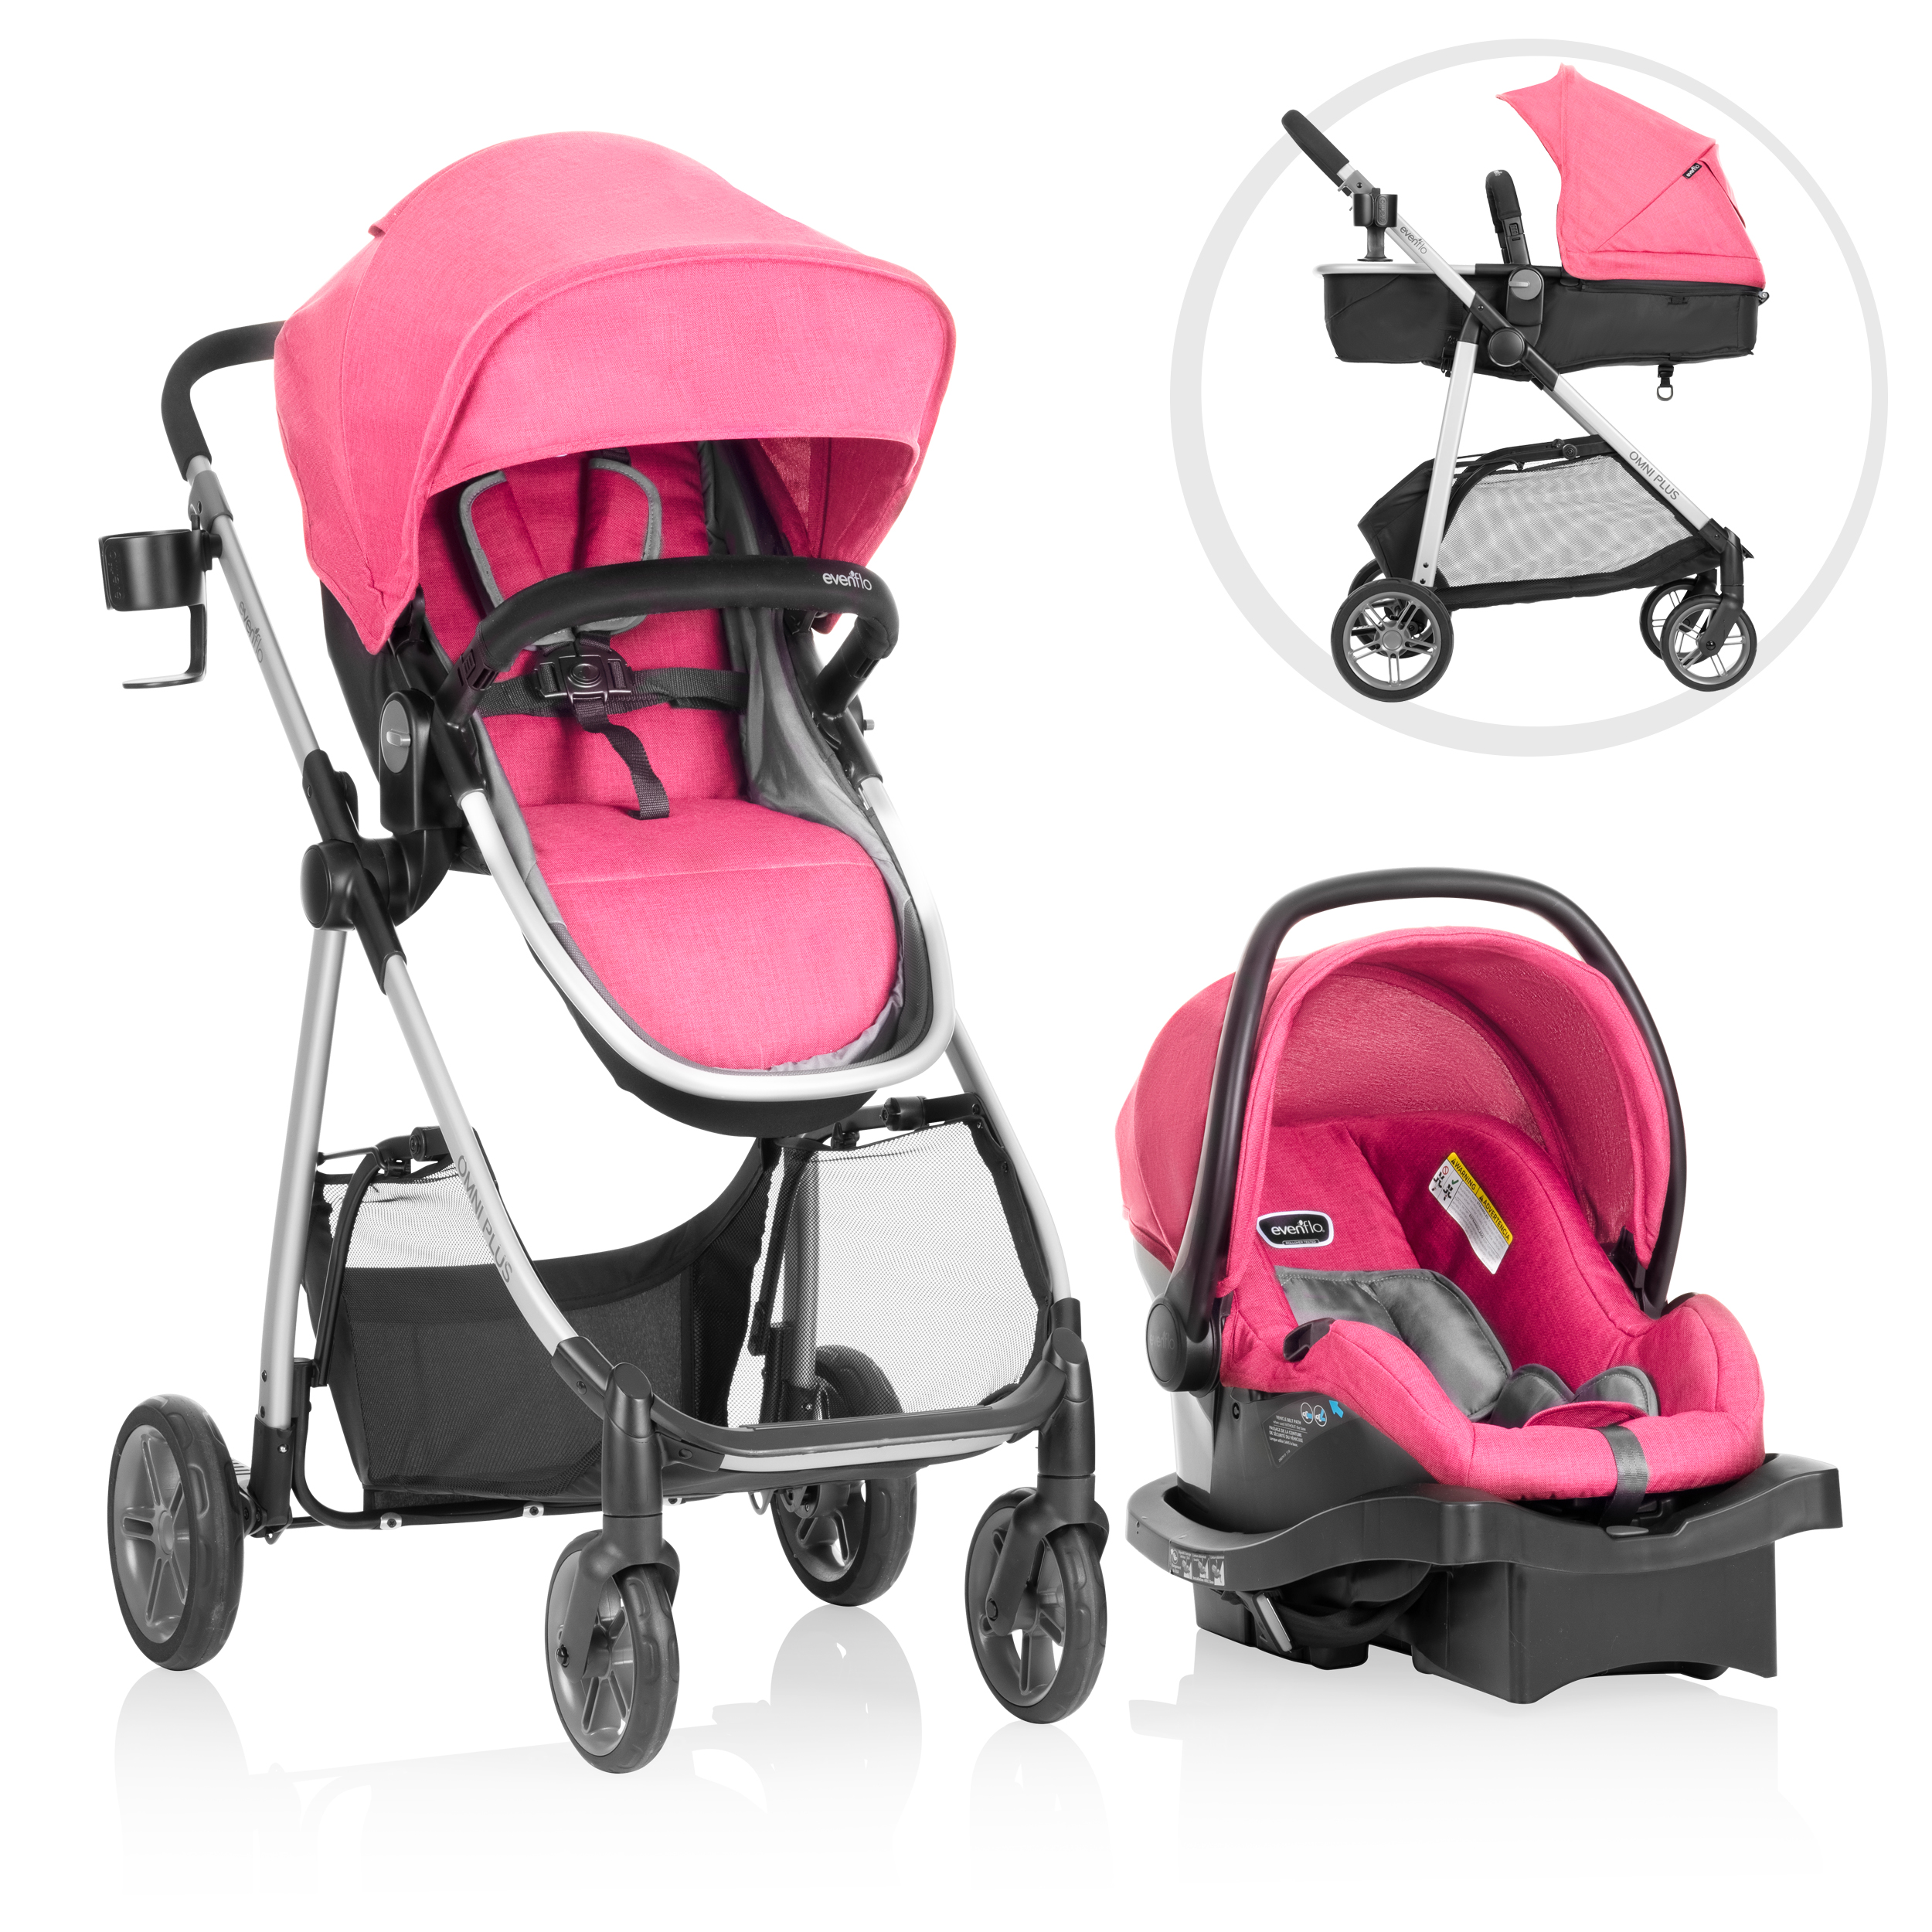 Evenflo Omni Plus Modular Travel System with LiteMax Sport Rear-Facing Infant Car Seat (Brizo Pink), Girl - image 1 of 19